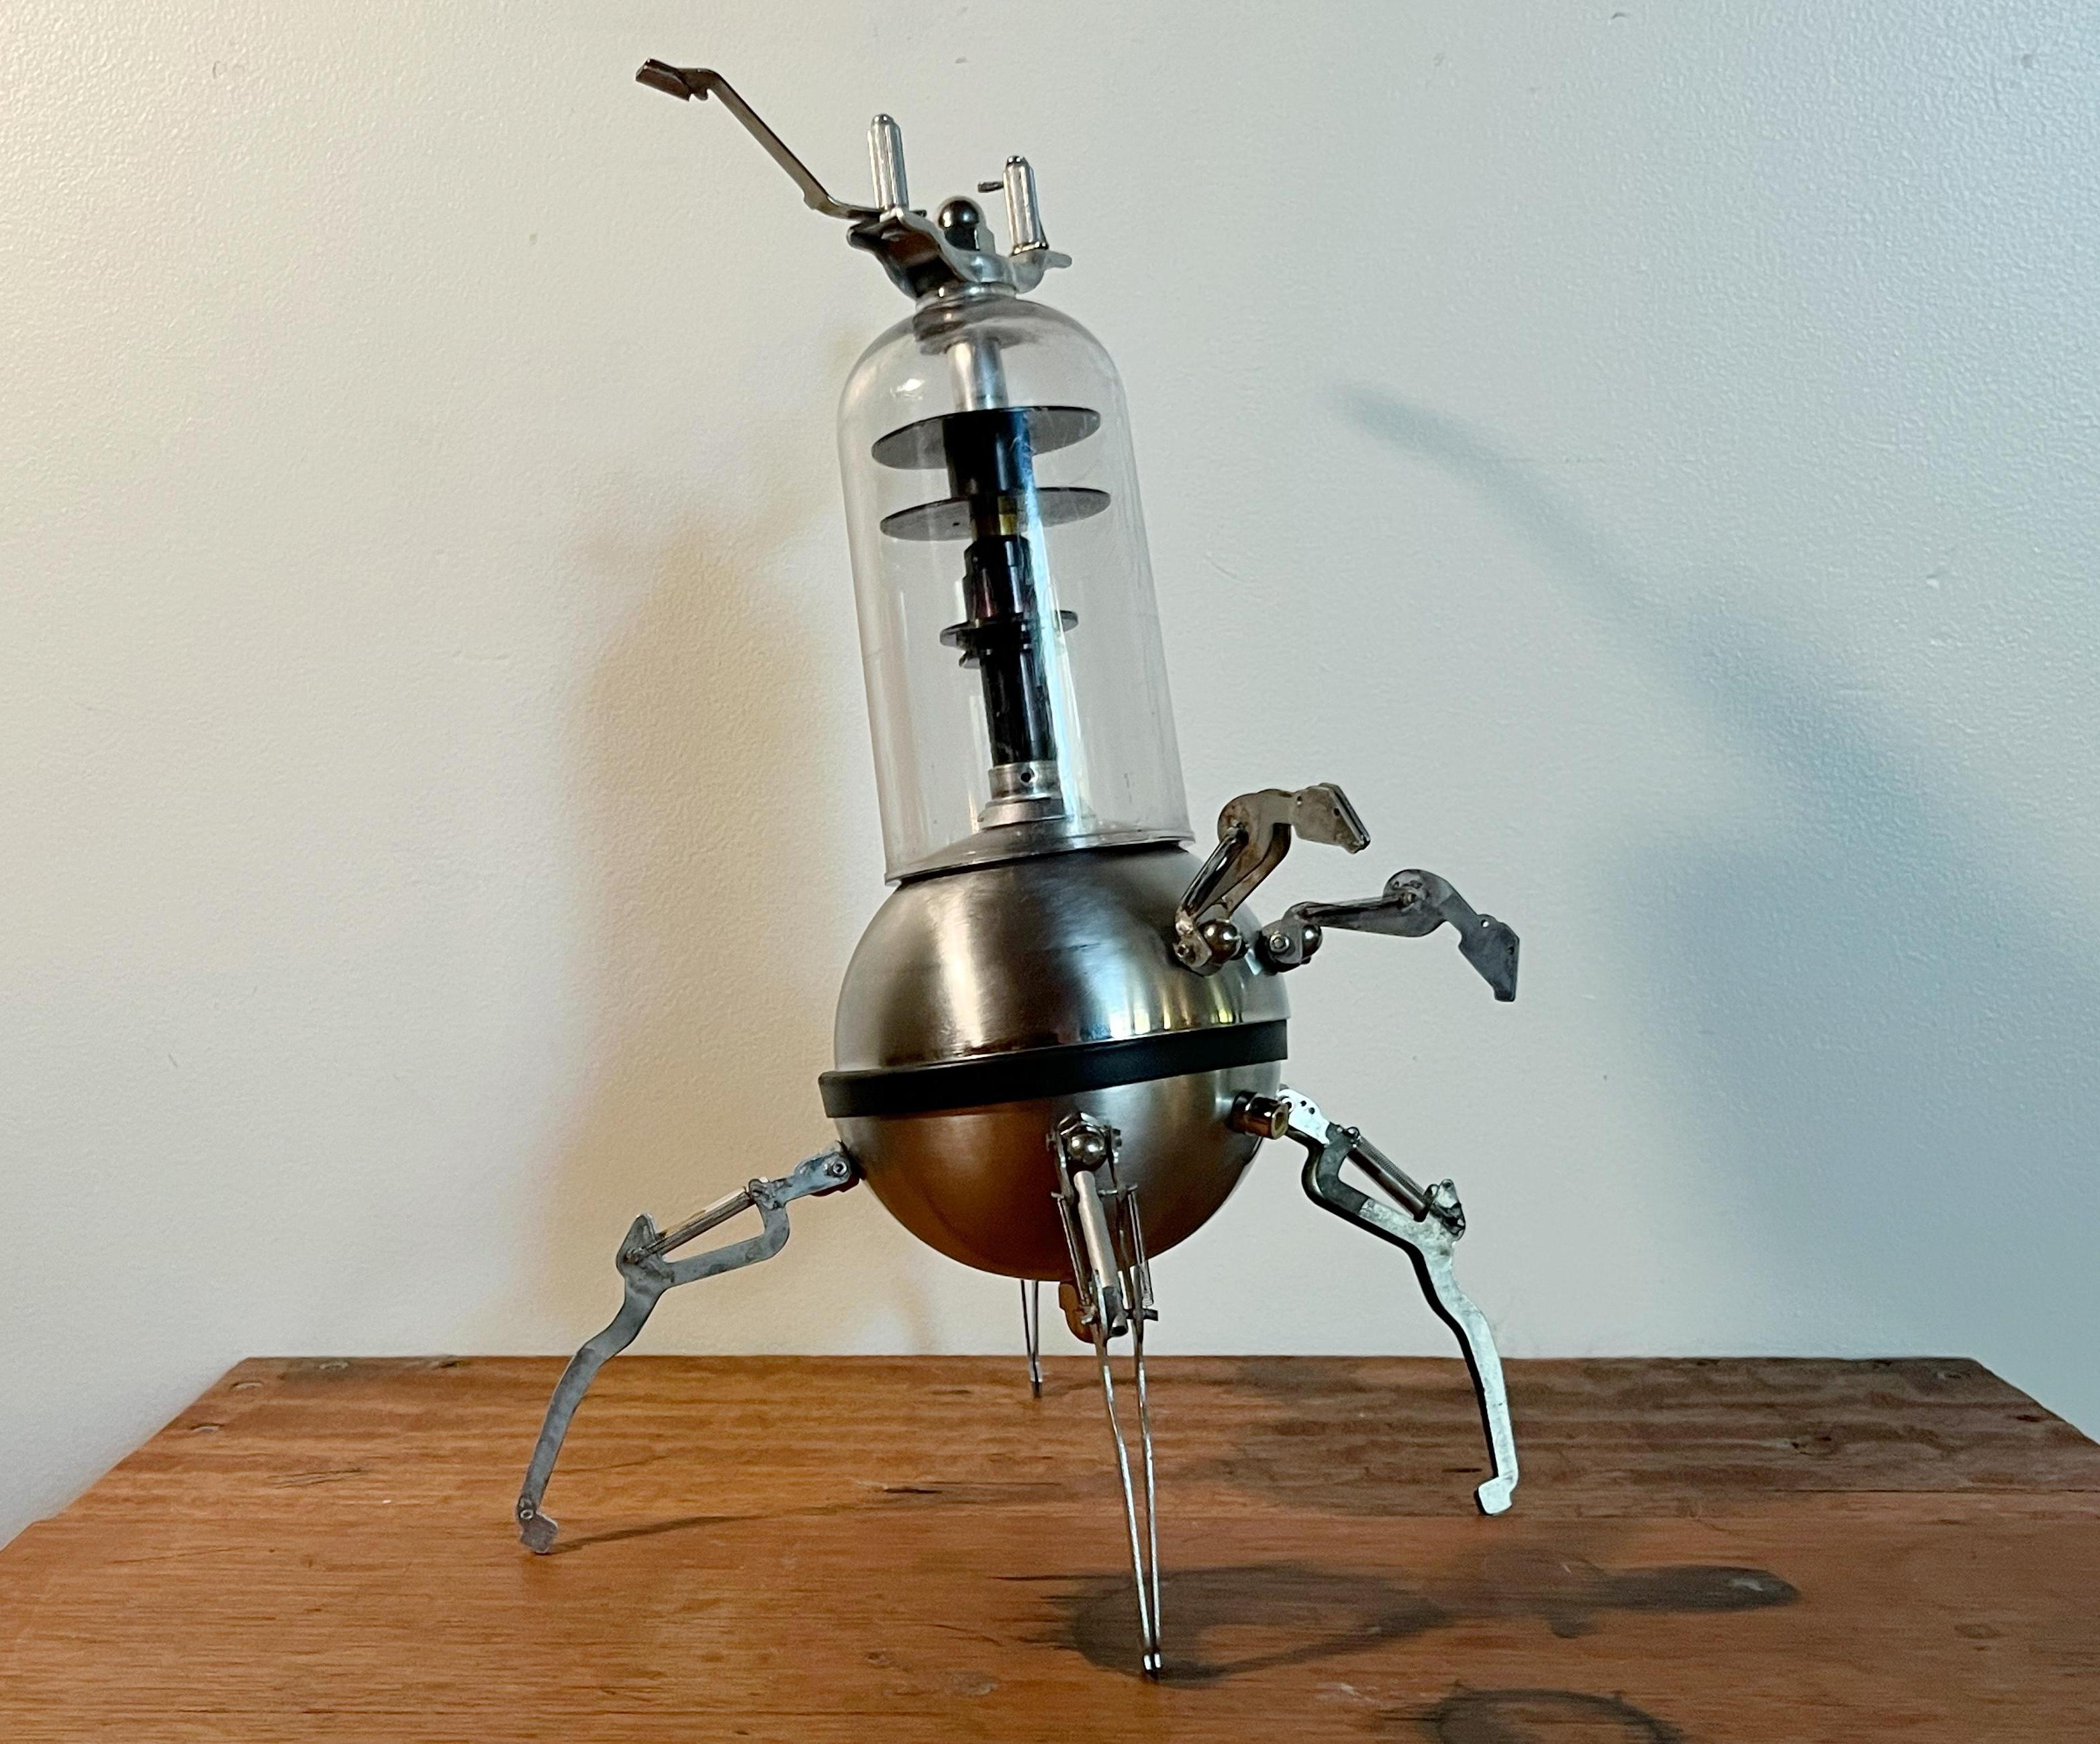 Junkbot Made From Typewriter Parts (mostly...)